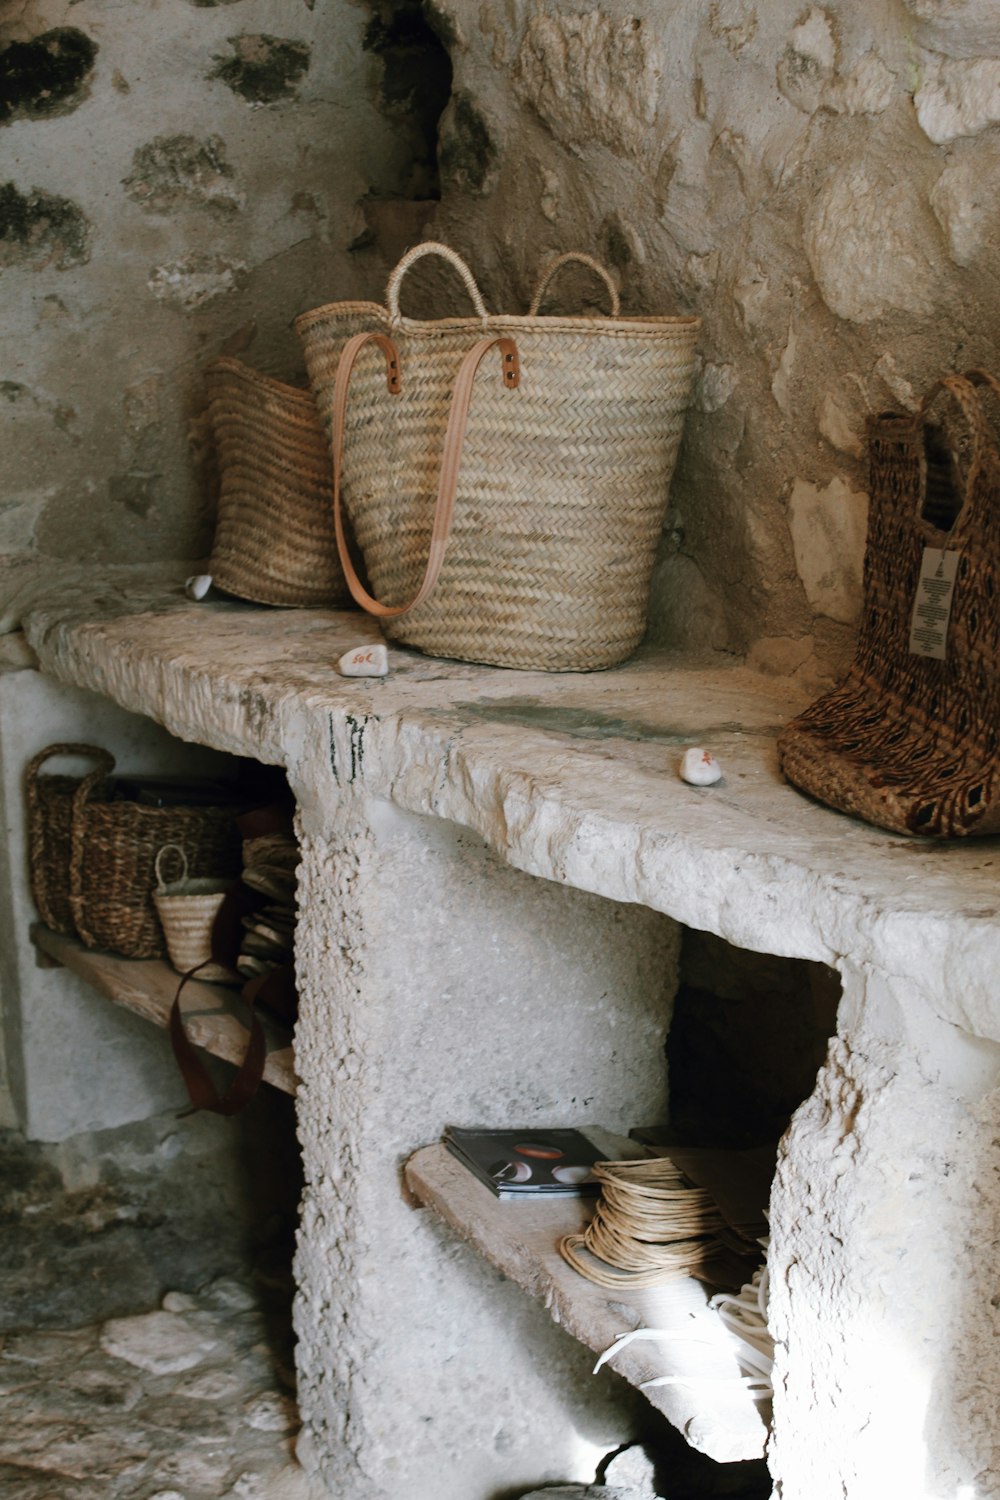 a shelf with baskets and baskets on top of it